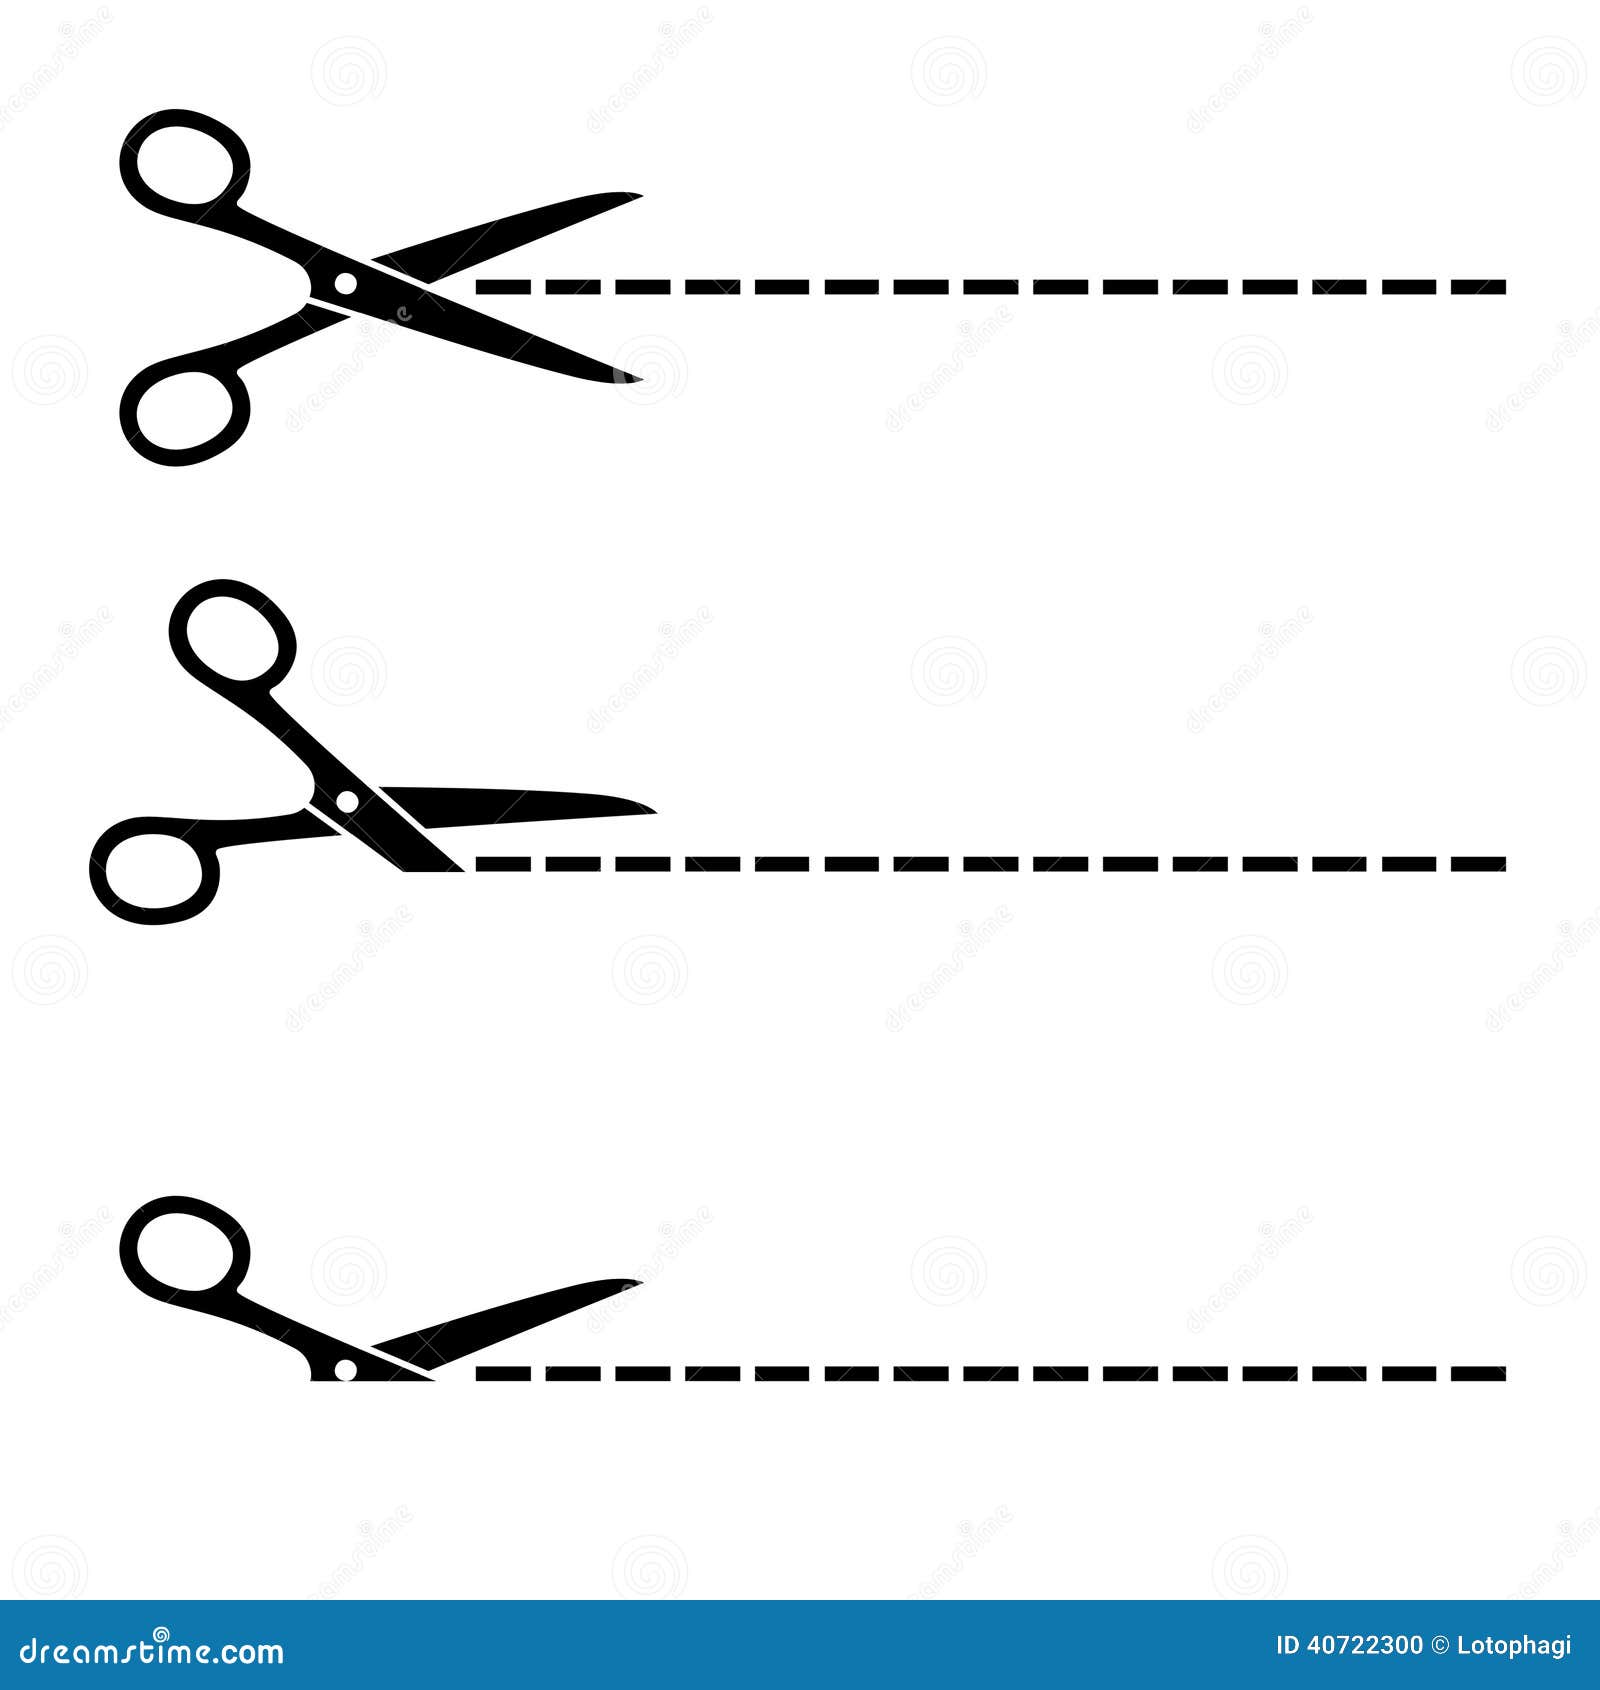 clipart perforated line with scissor - photo #22